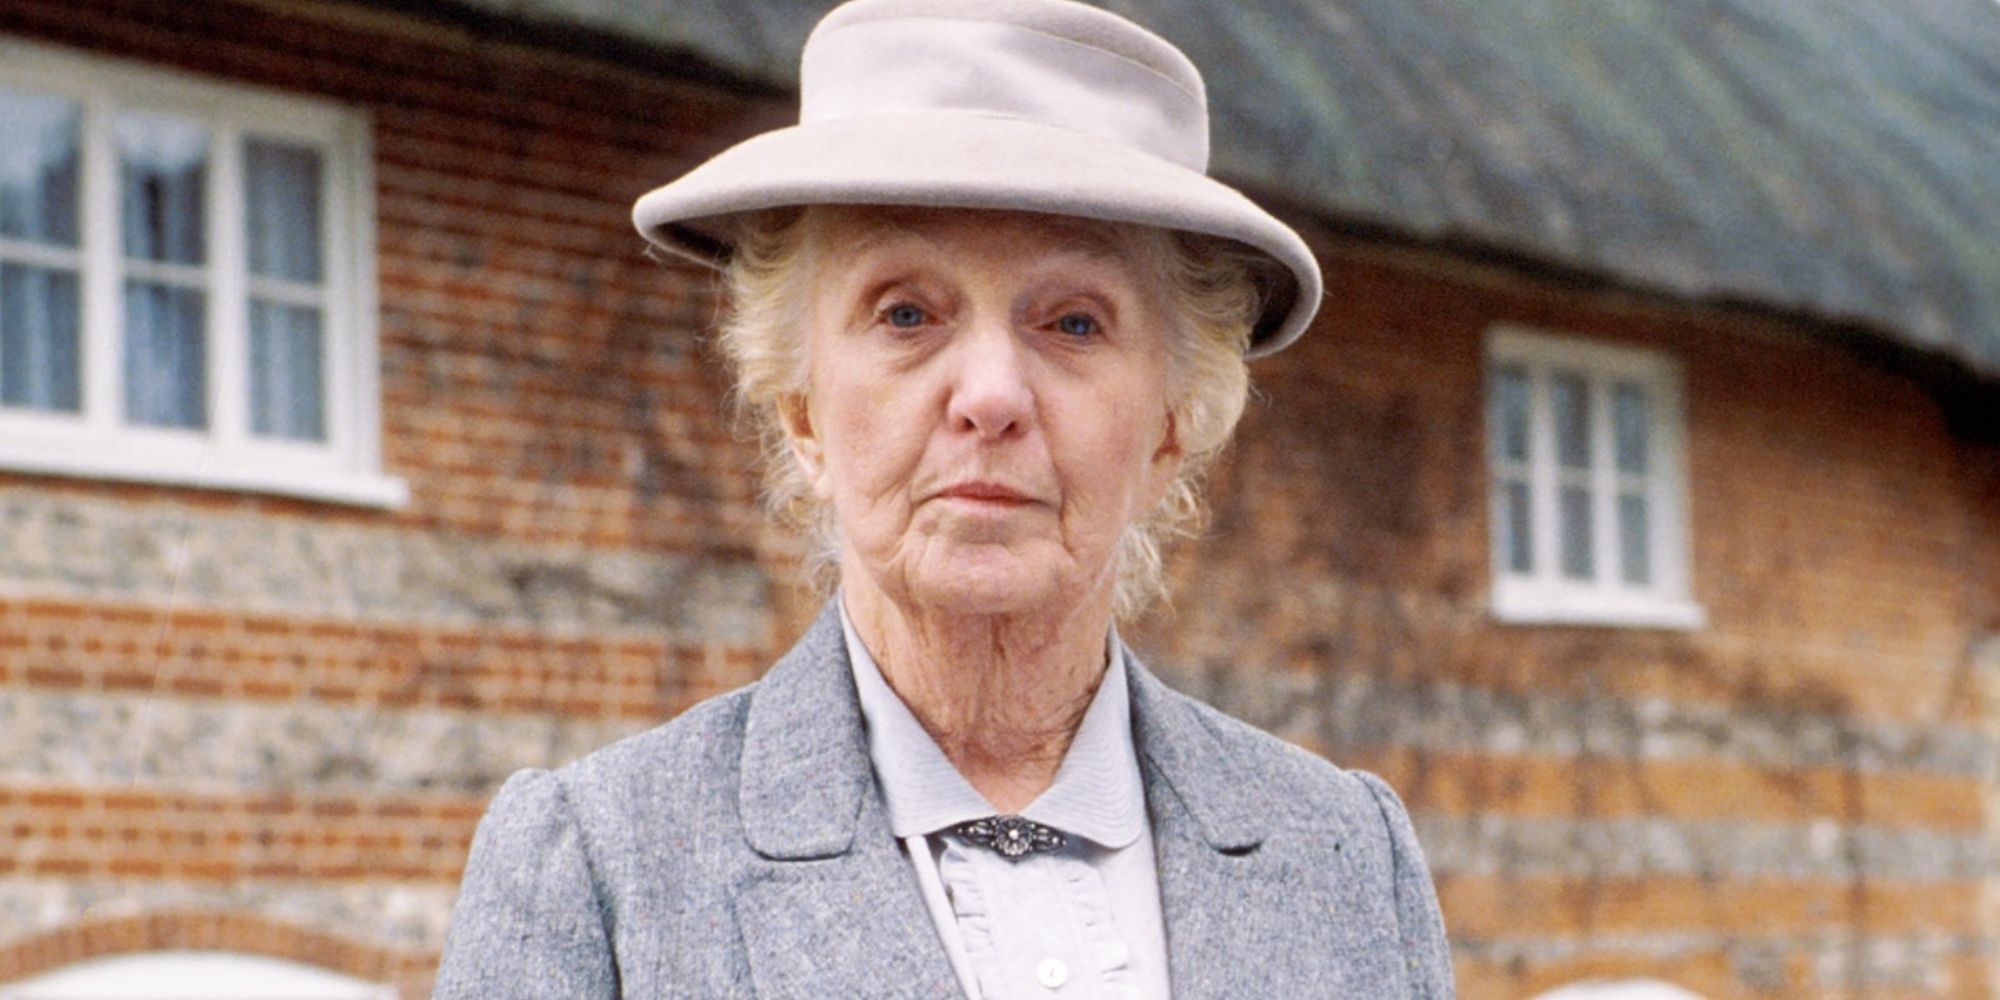 Joan Hickson playing Miss Marple in the BBC tv series